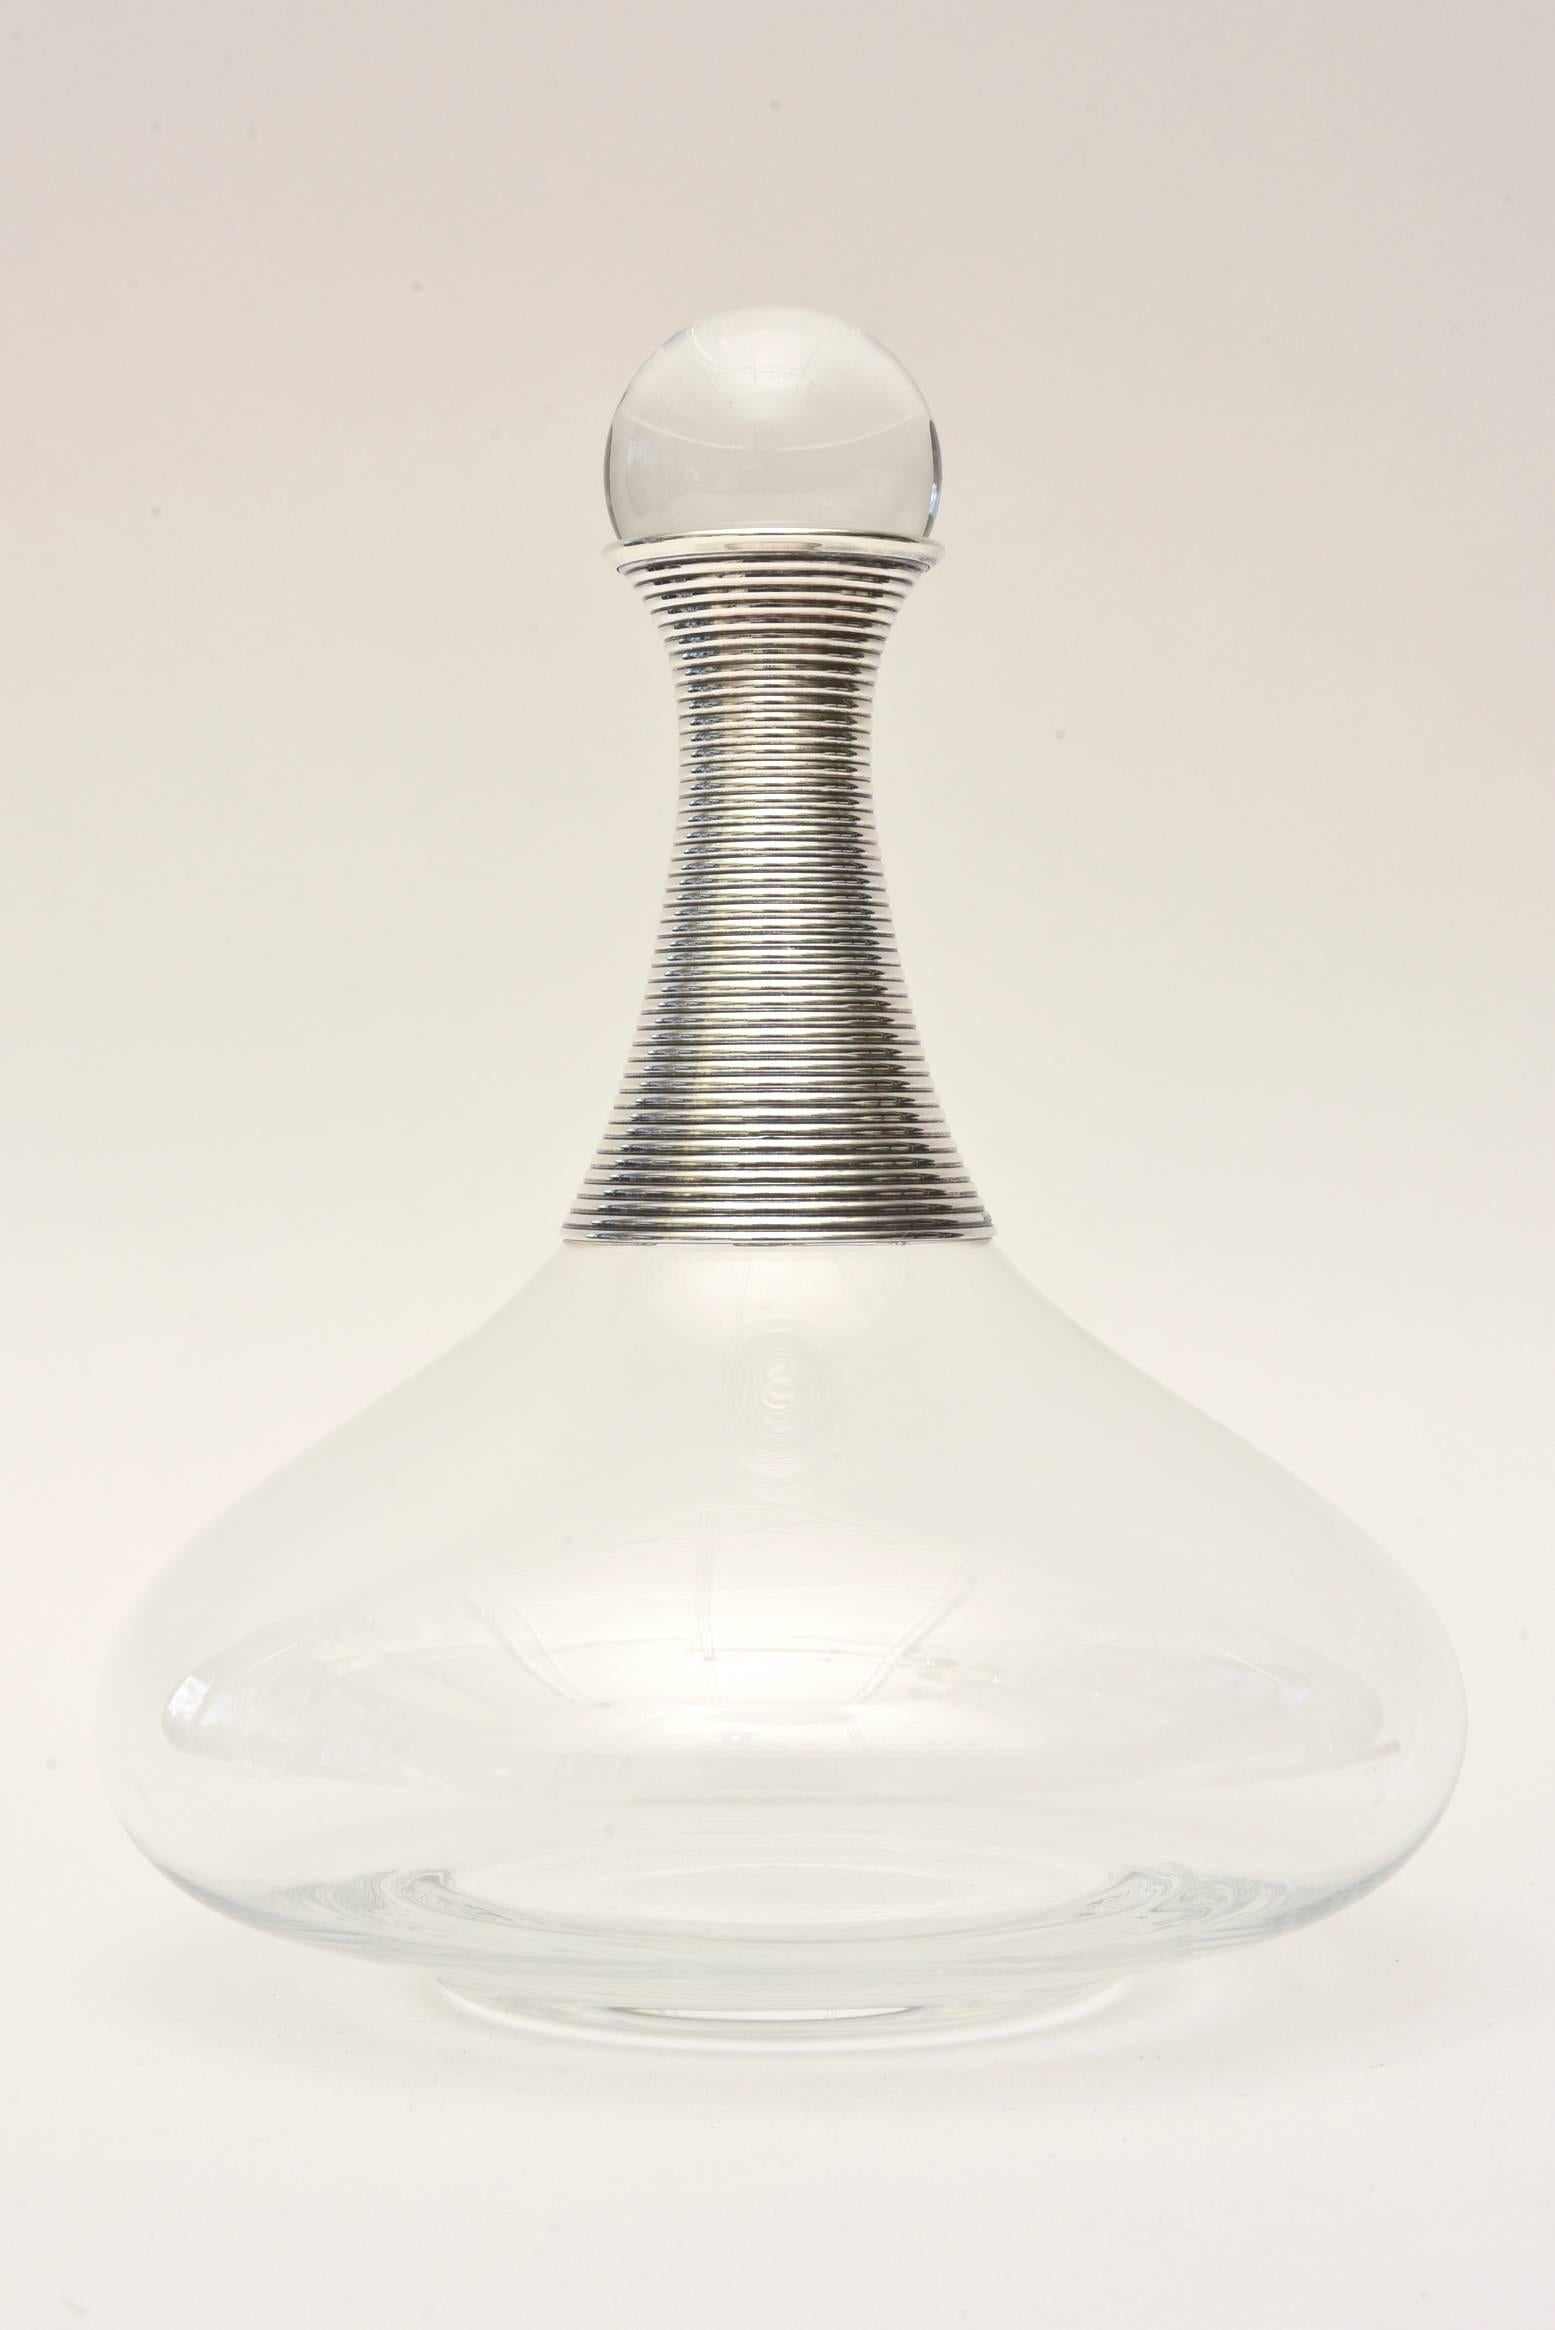 This amazing sexy bulbous glass decanter with a glass stopper has ribbed silver plate neck and a glass ball stopper. The shape is beautiful. It is from the 1960s and from a company in Canada that is the equivalent of what Tiffany is in America. It